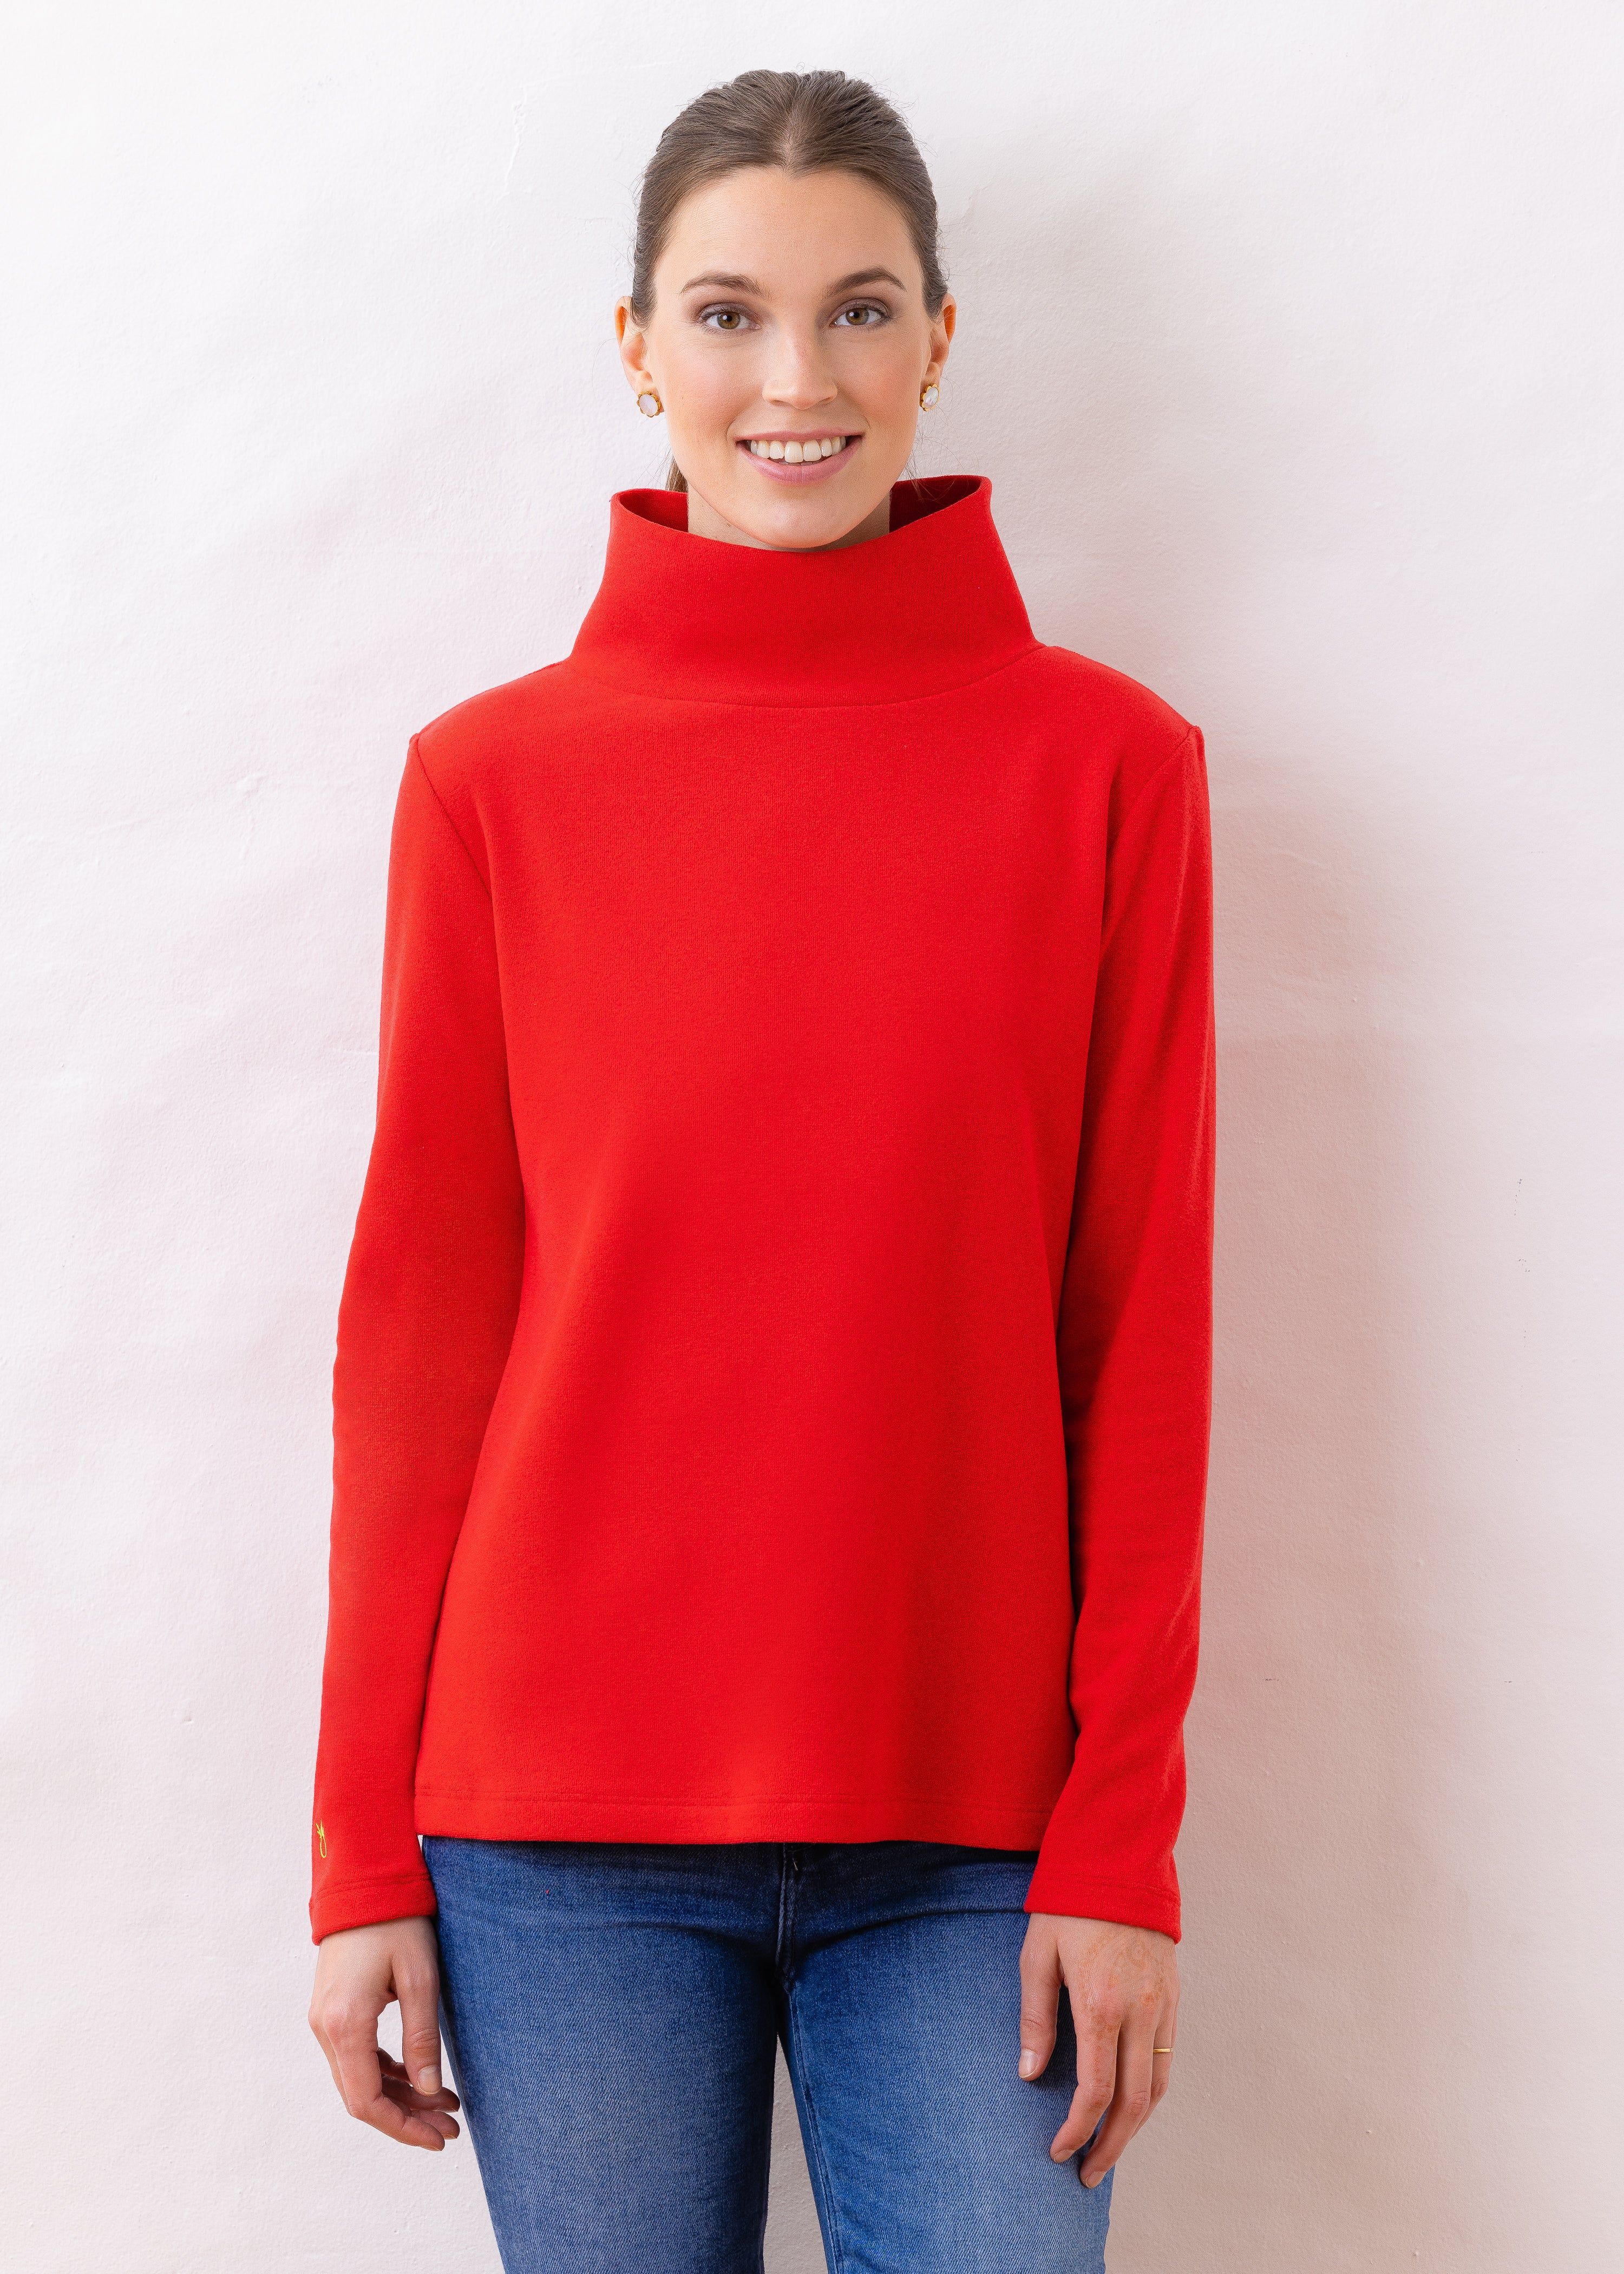 Greenpoint Turtleneck in Terry Fleece (Red) | Dudley Stephens